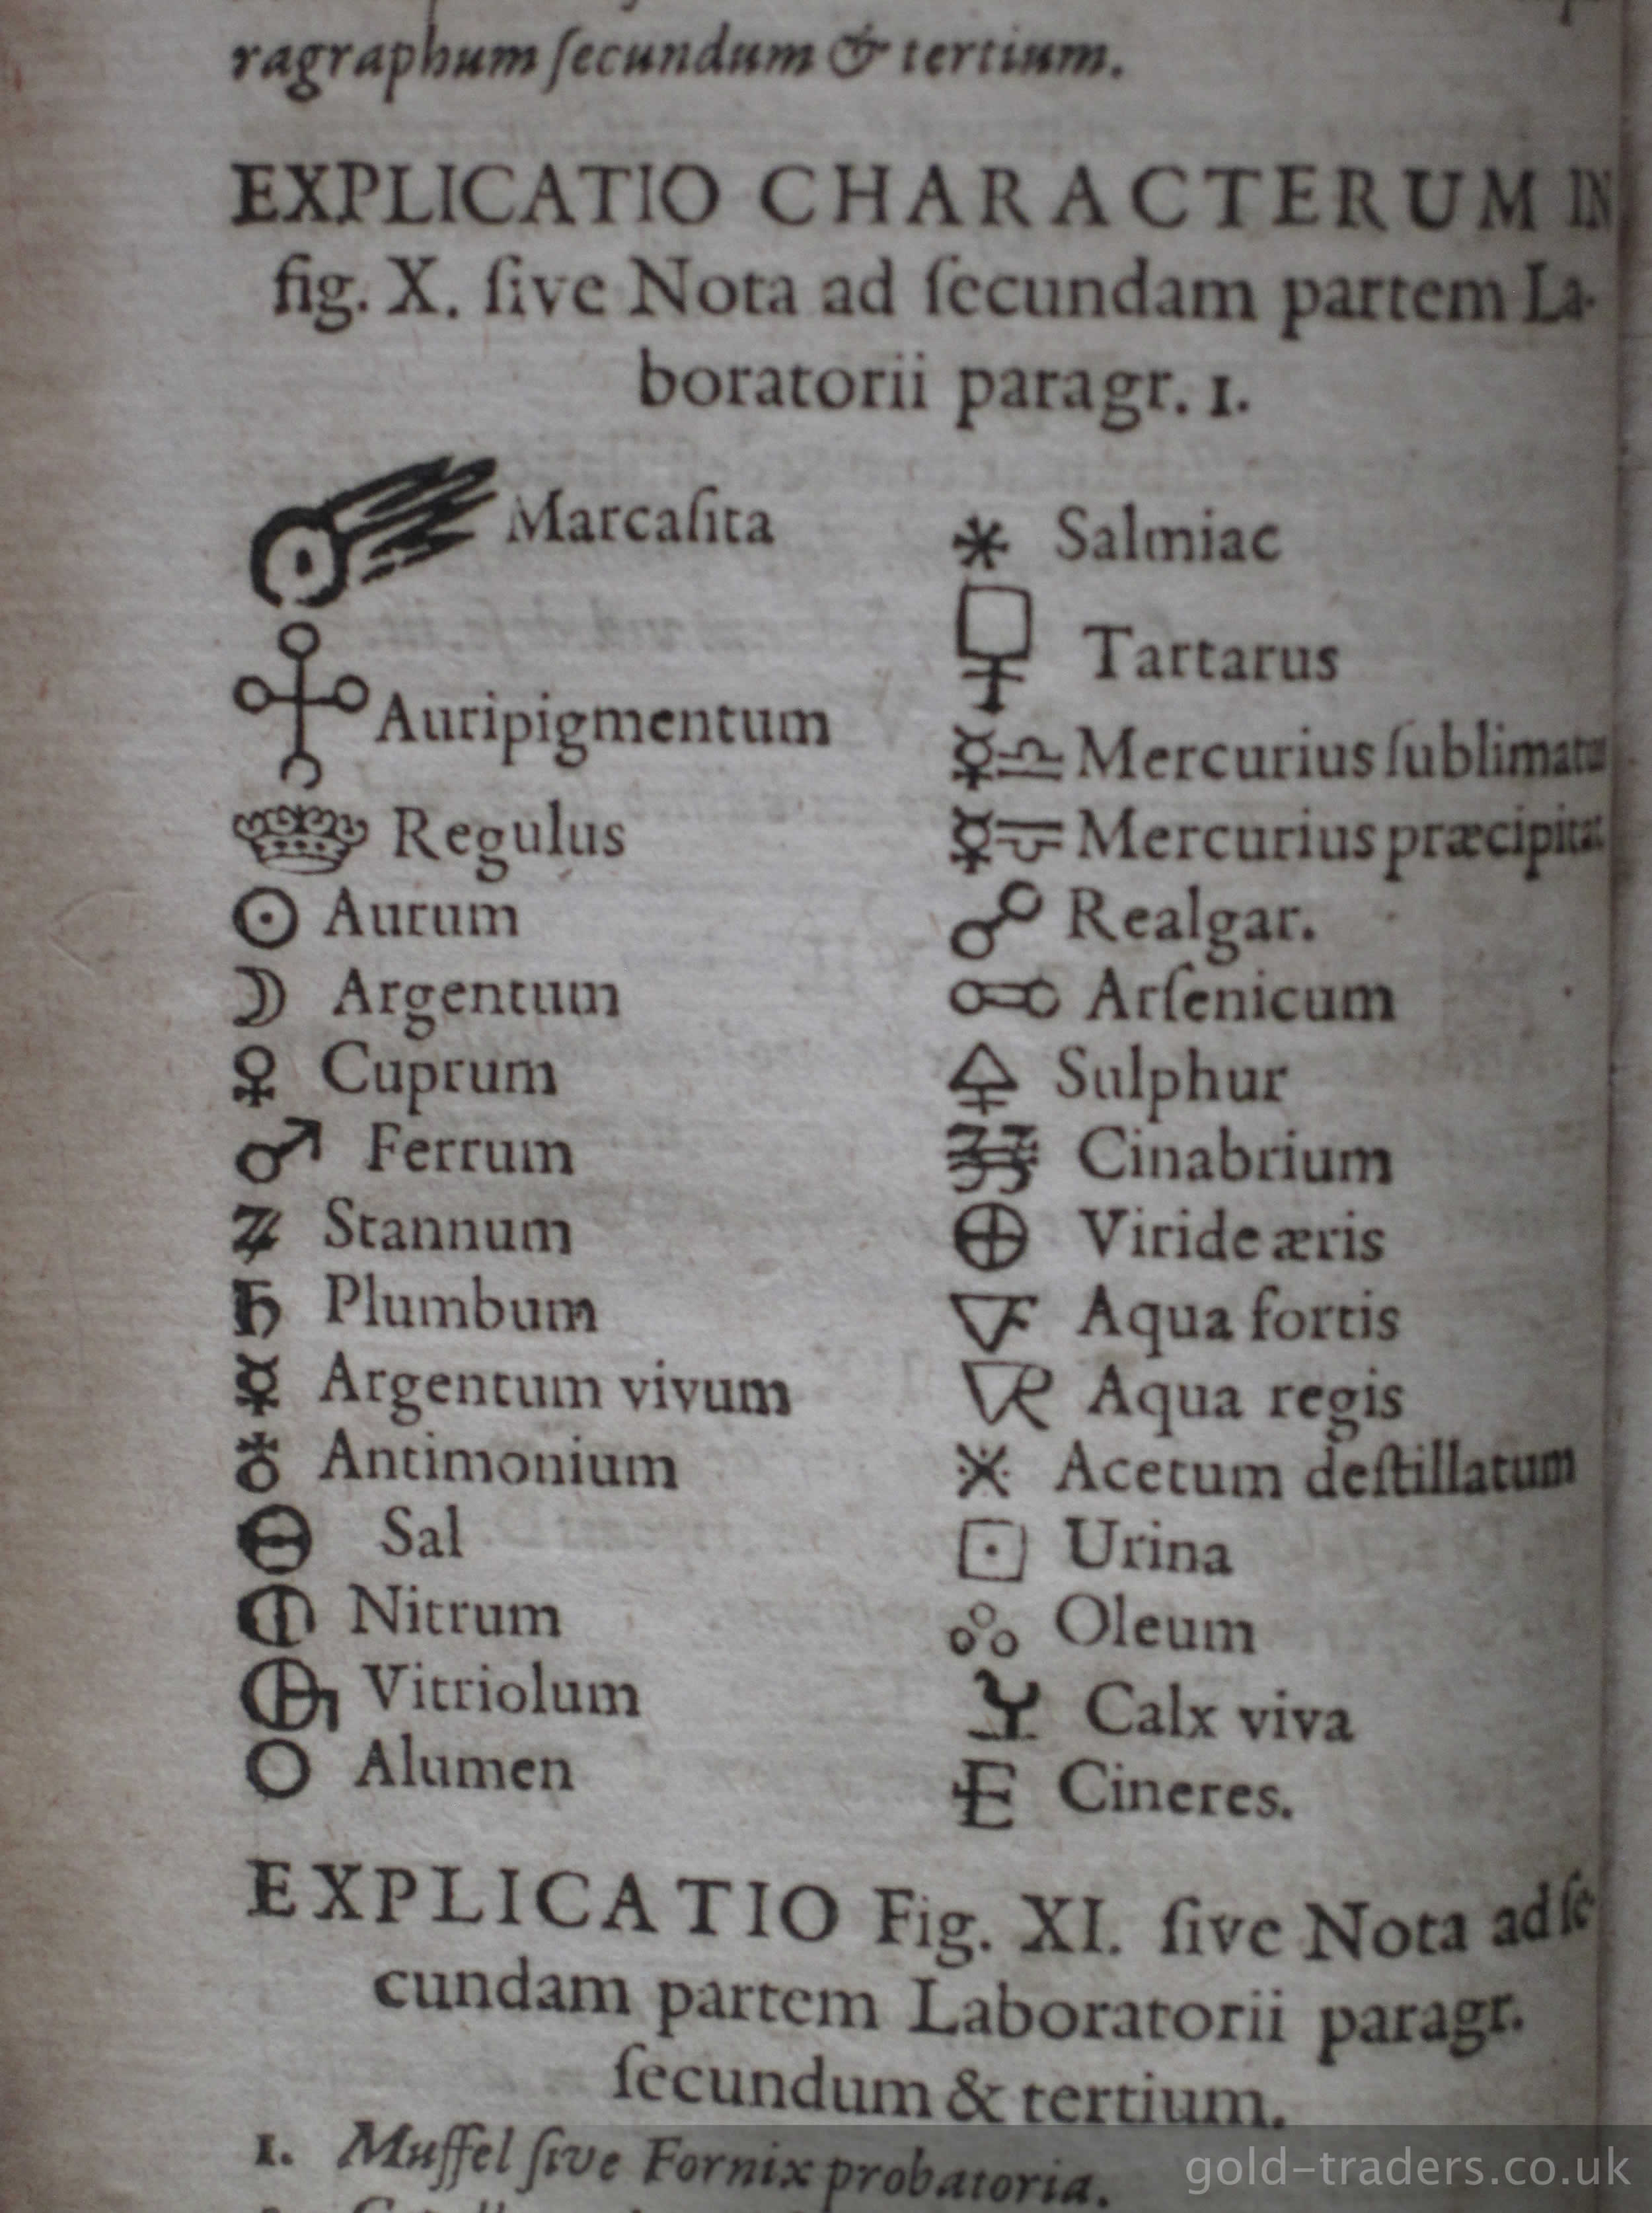 Common ingredients used in alchemy